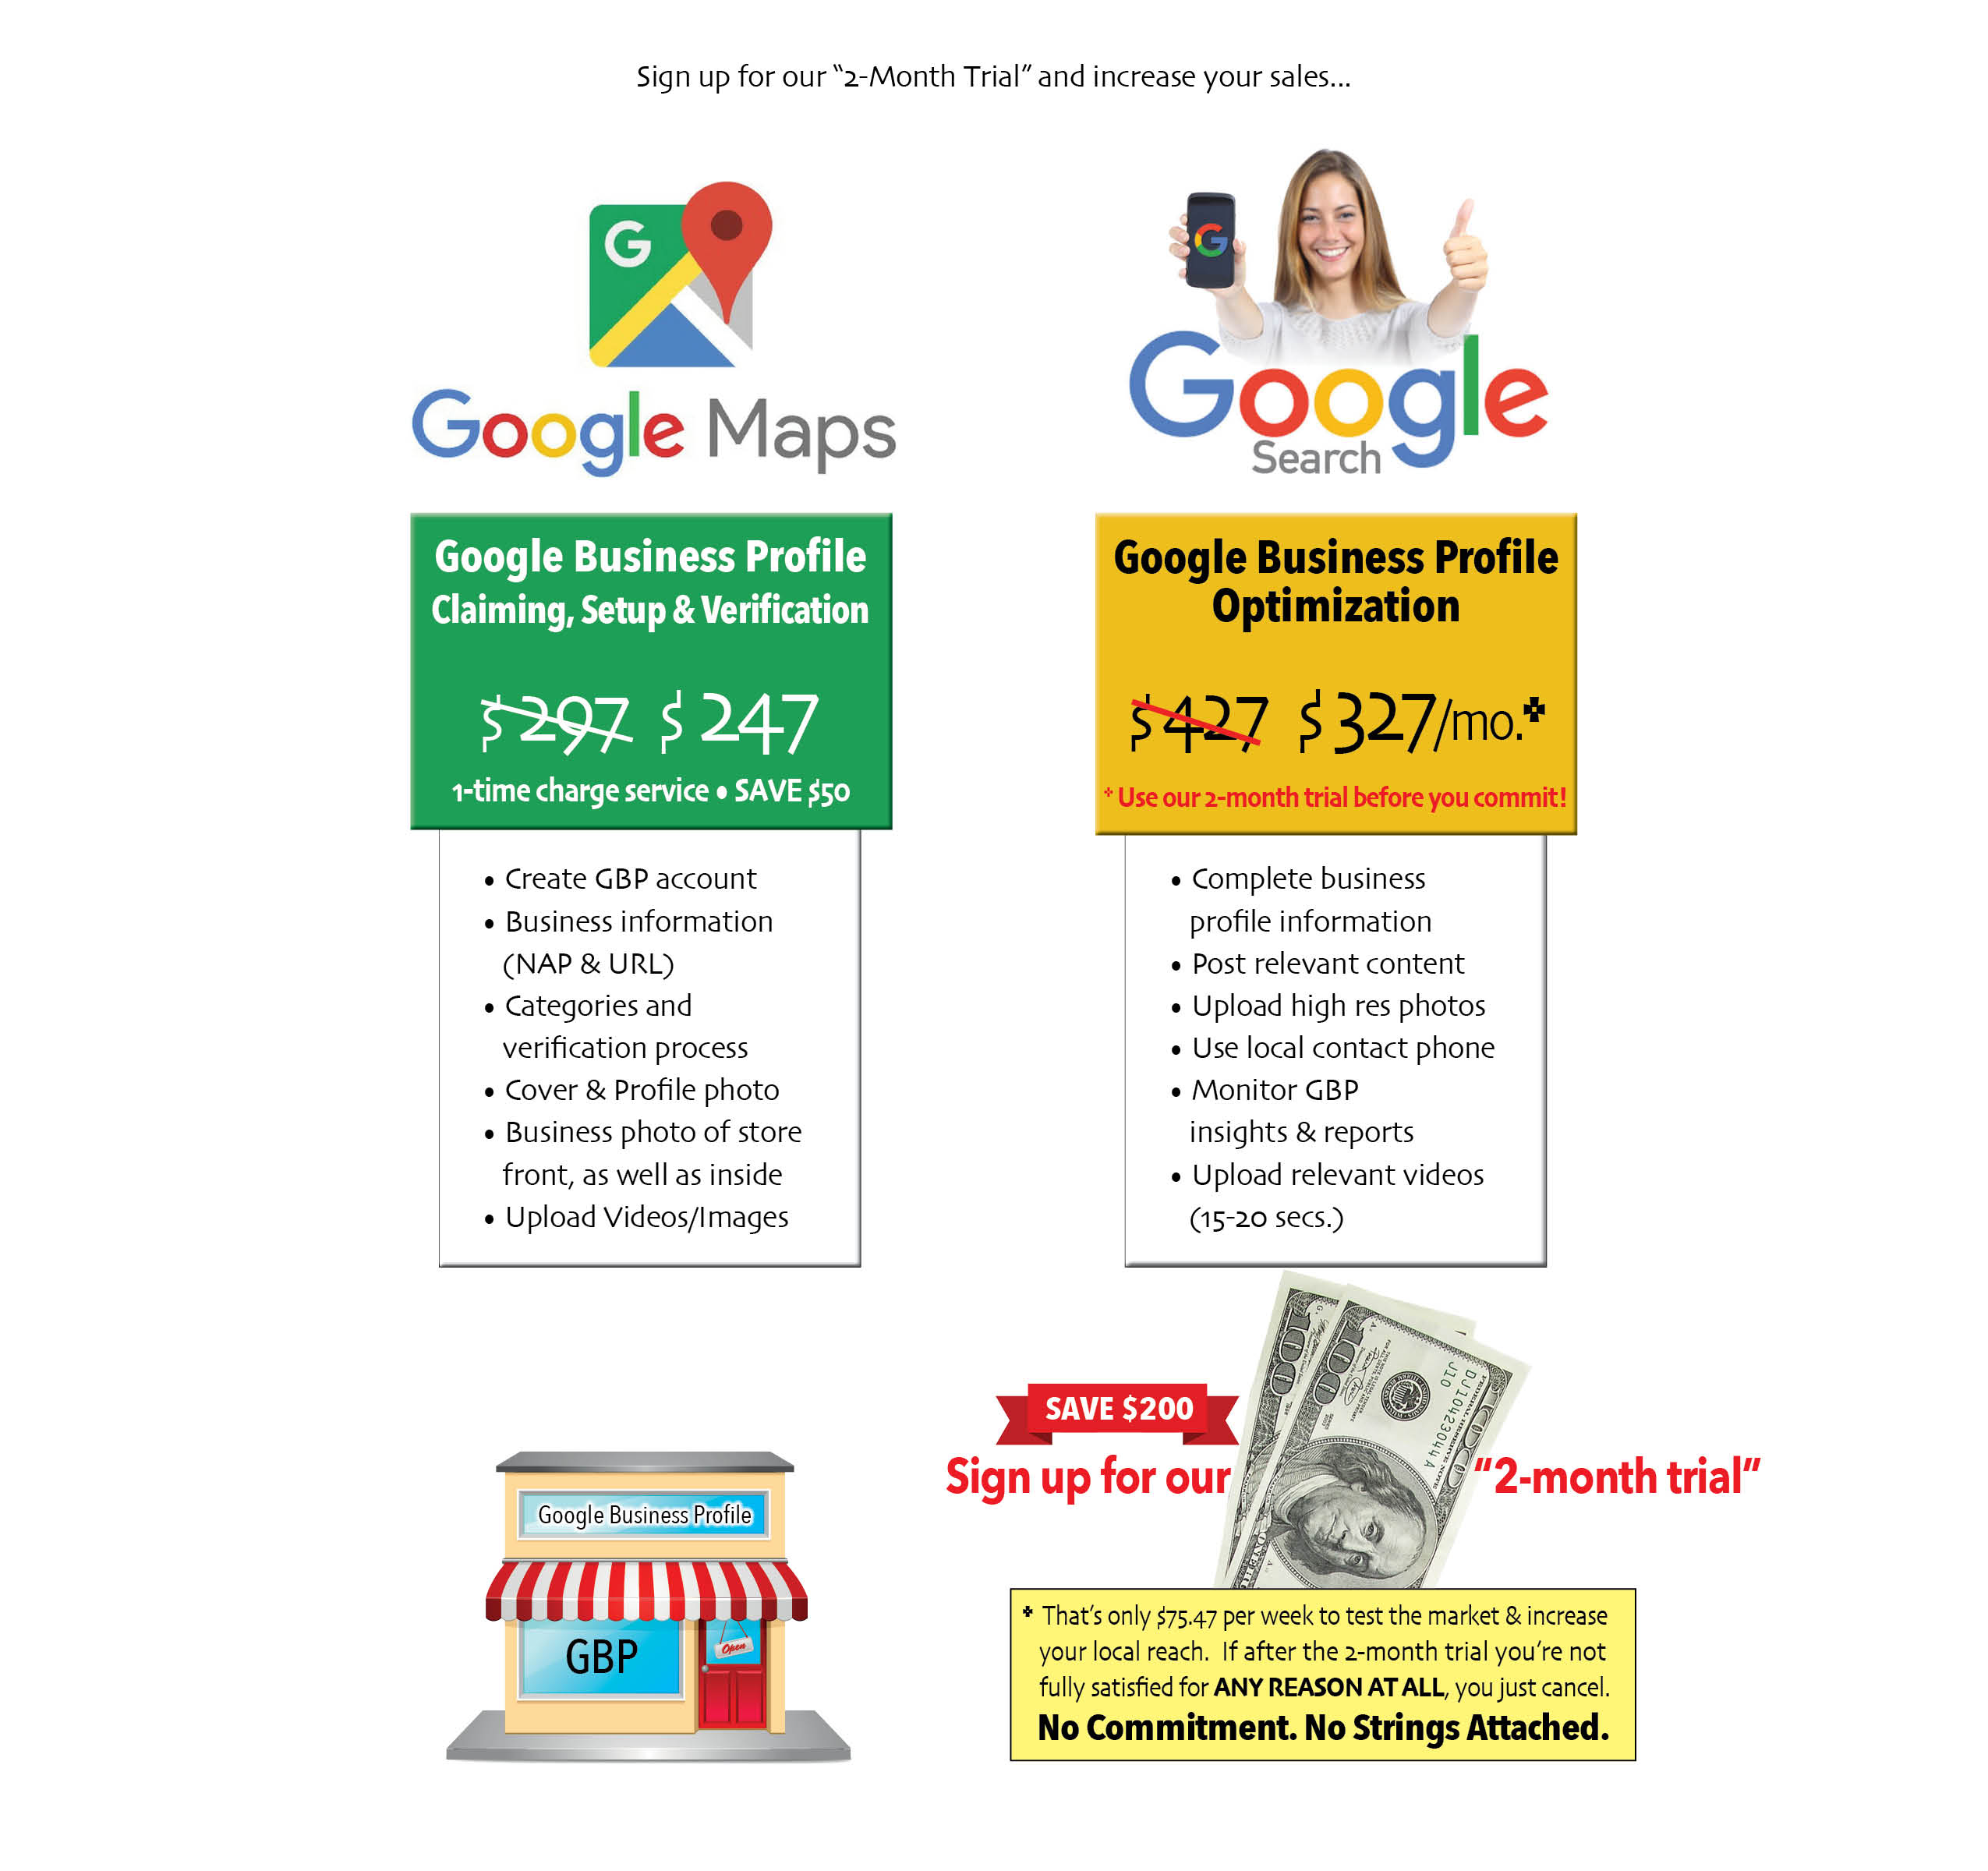 google-business-profile-optimization-services-september-1-special-$327-per-month-only-a-2-month-committment-required